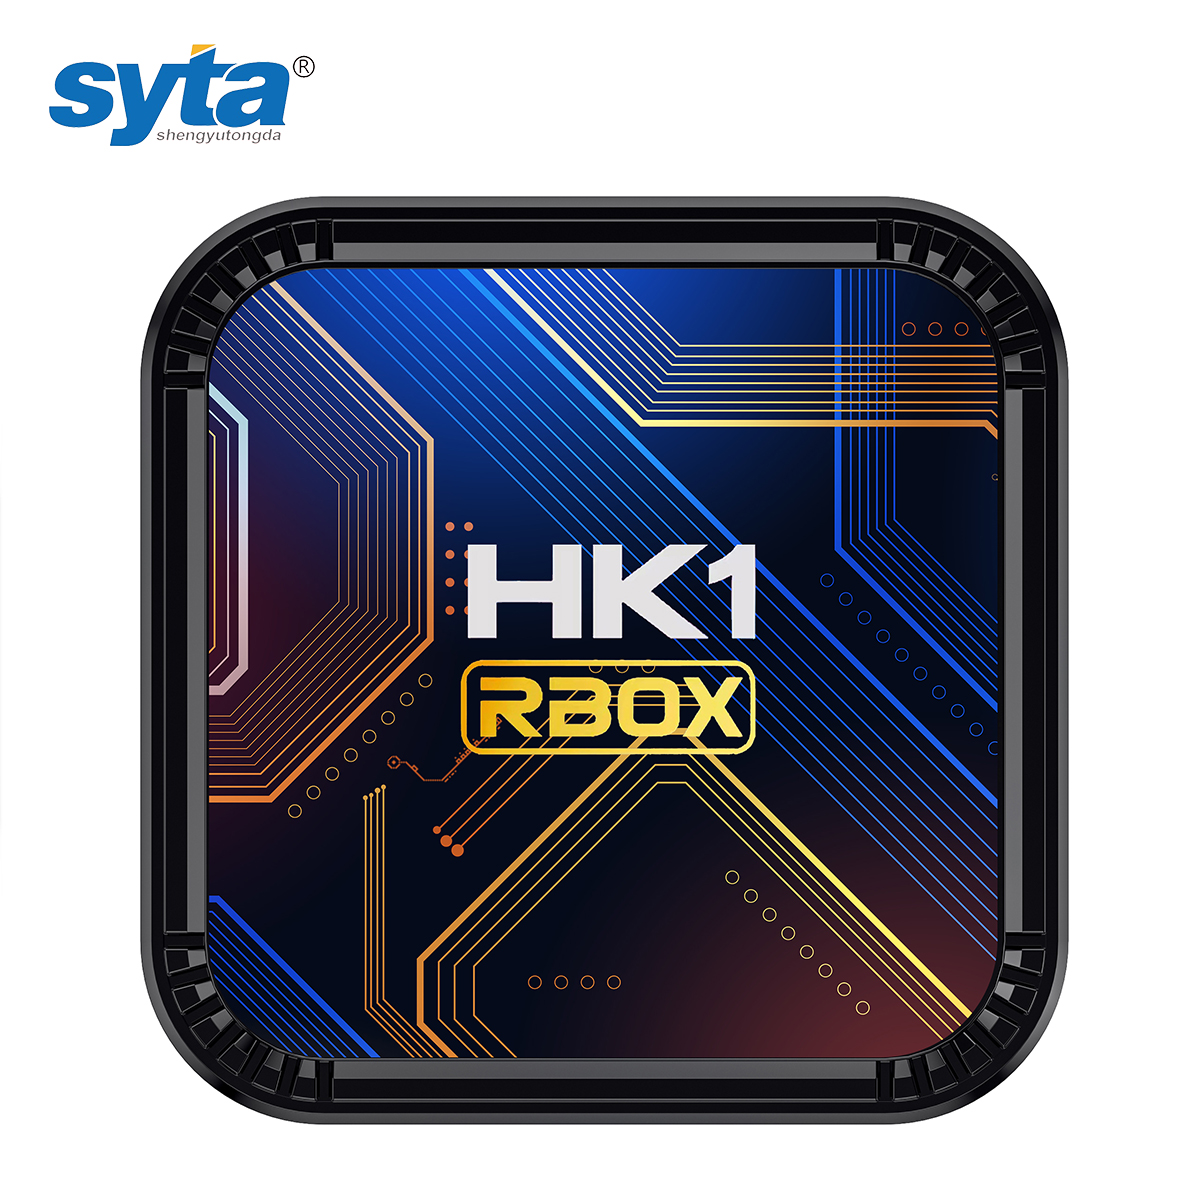 SYTA HK1 RBOX K8S Android 13 Dual-band Wifi 4k Player Tv Box gyroscope voice remote control TV box RK3528 Network Smart Set Top Box